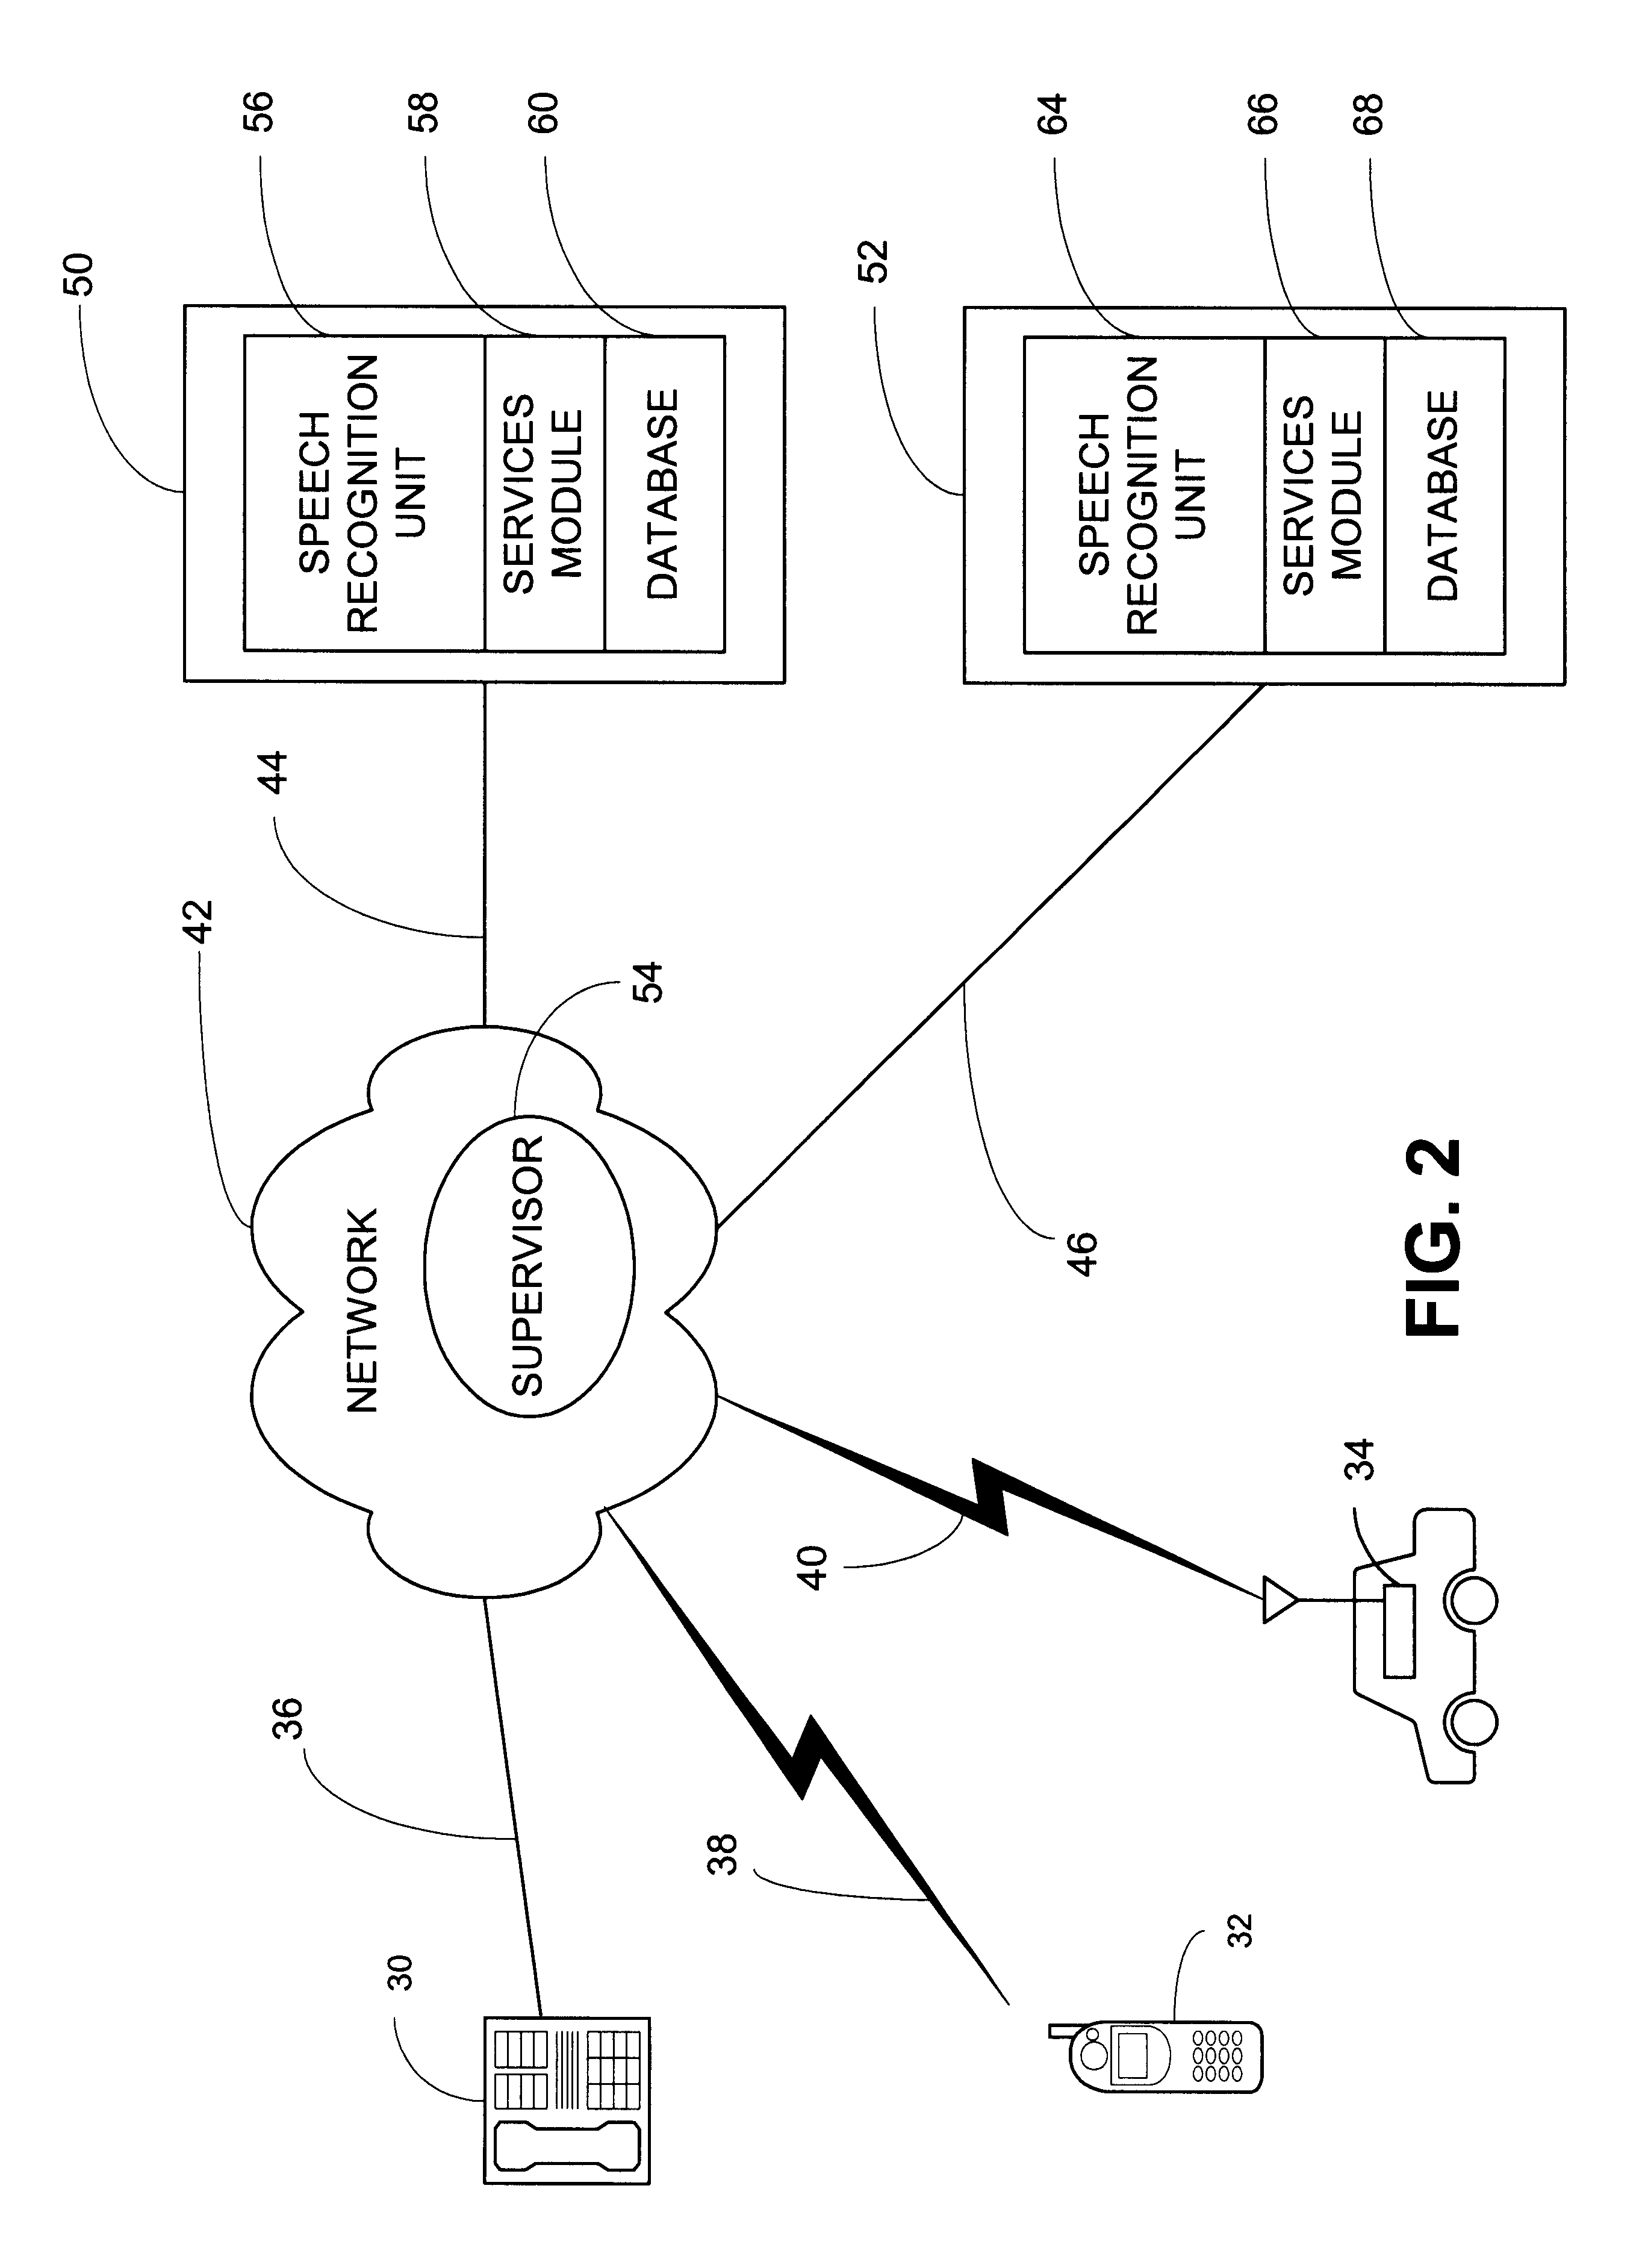 Speech recognition that adjusts automatically to input devices